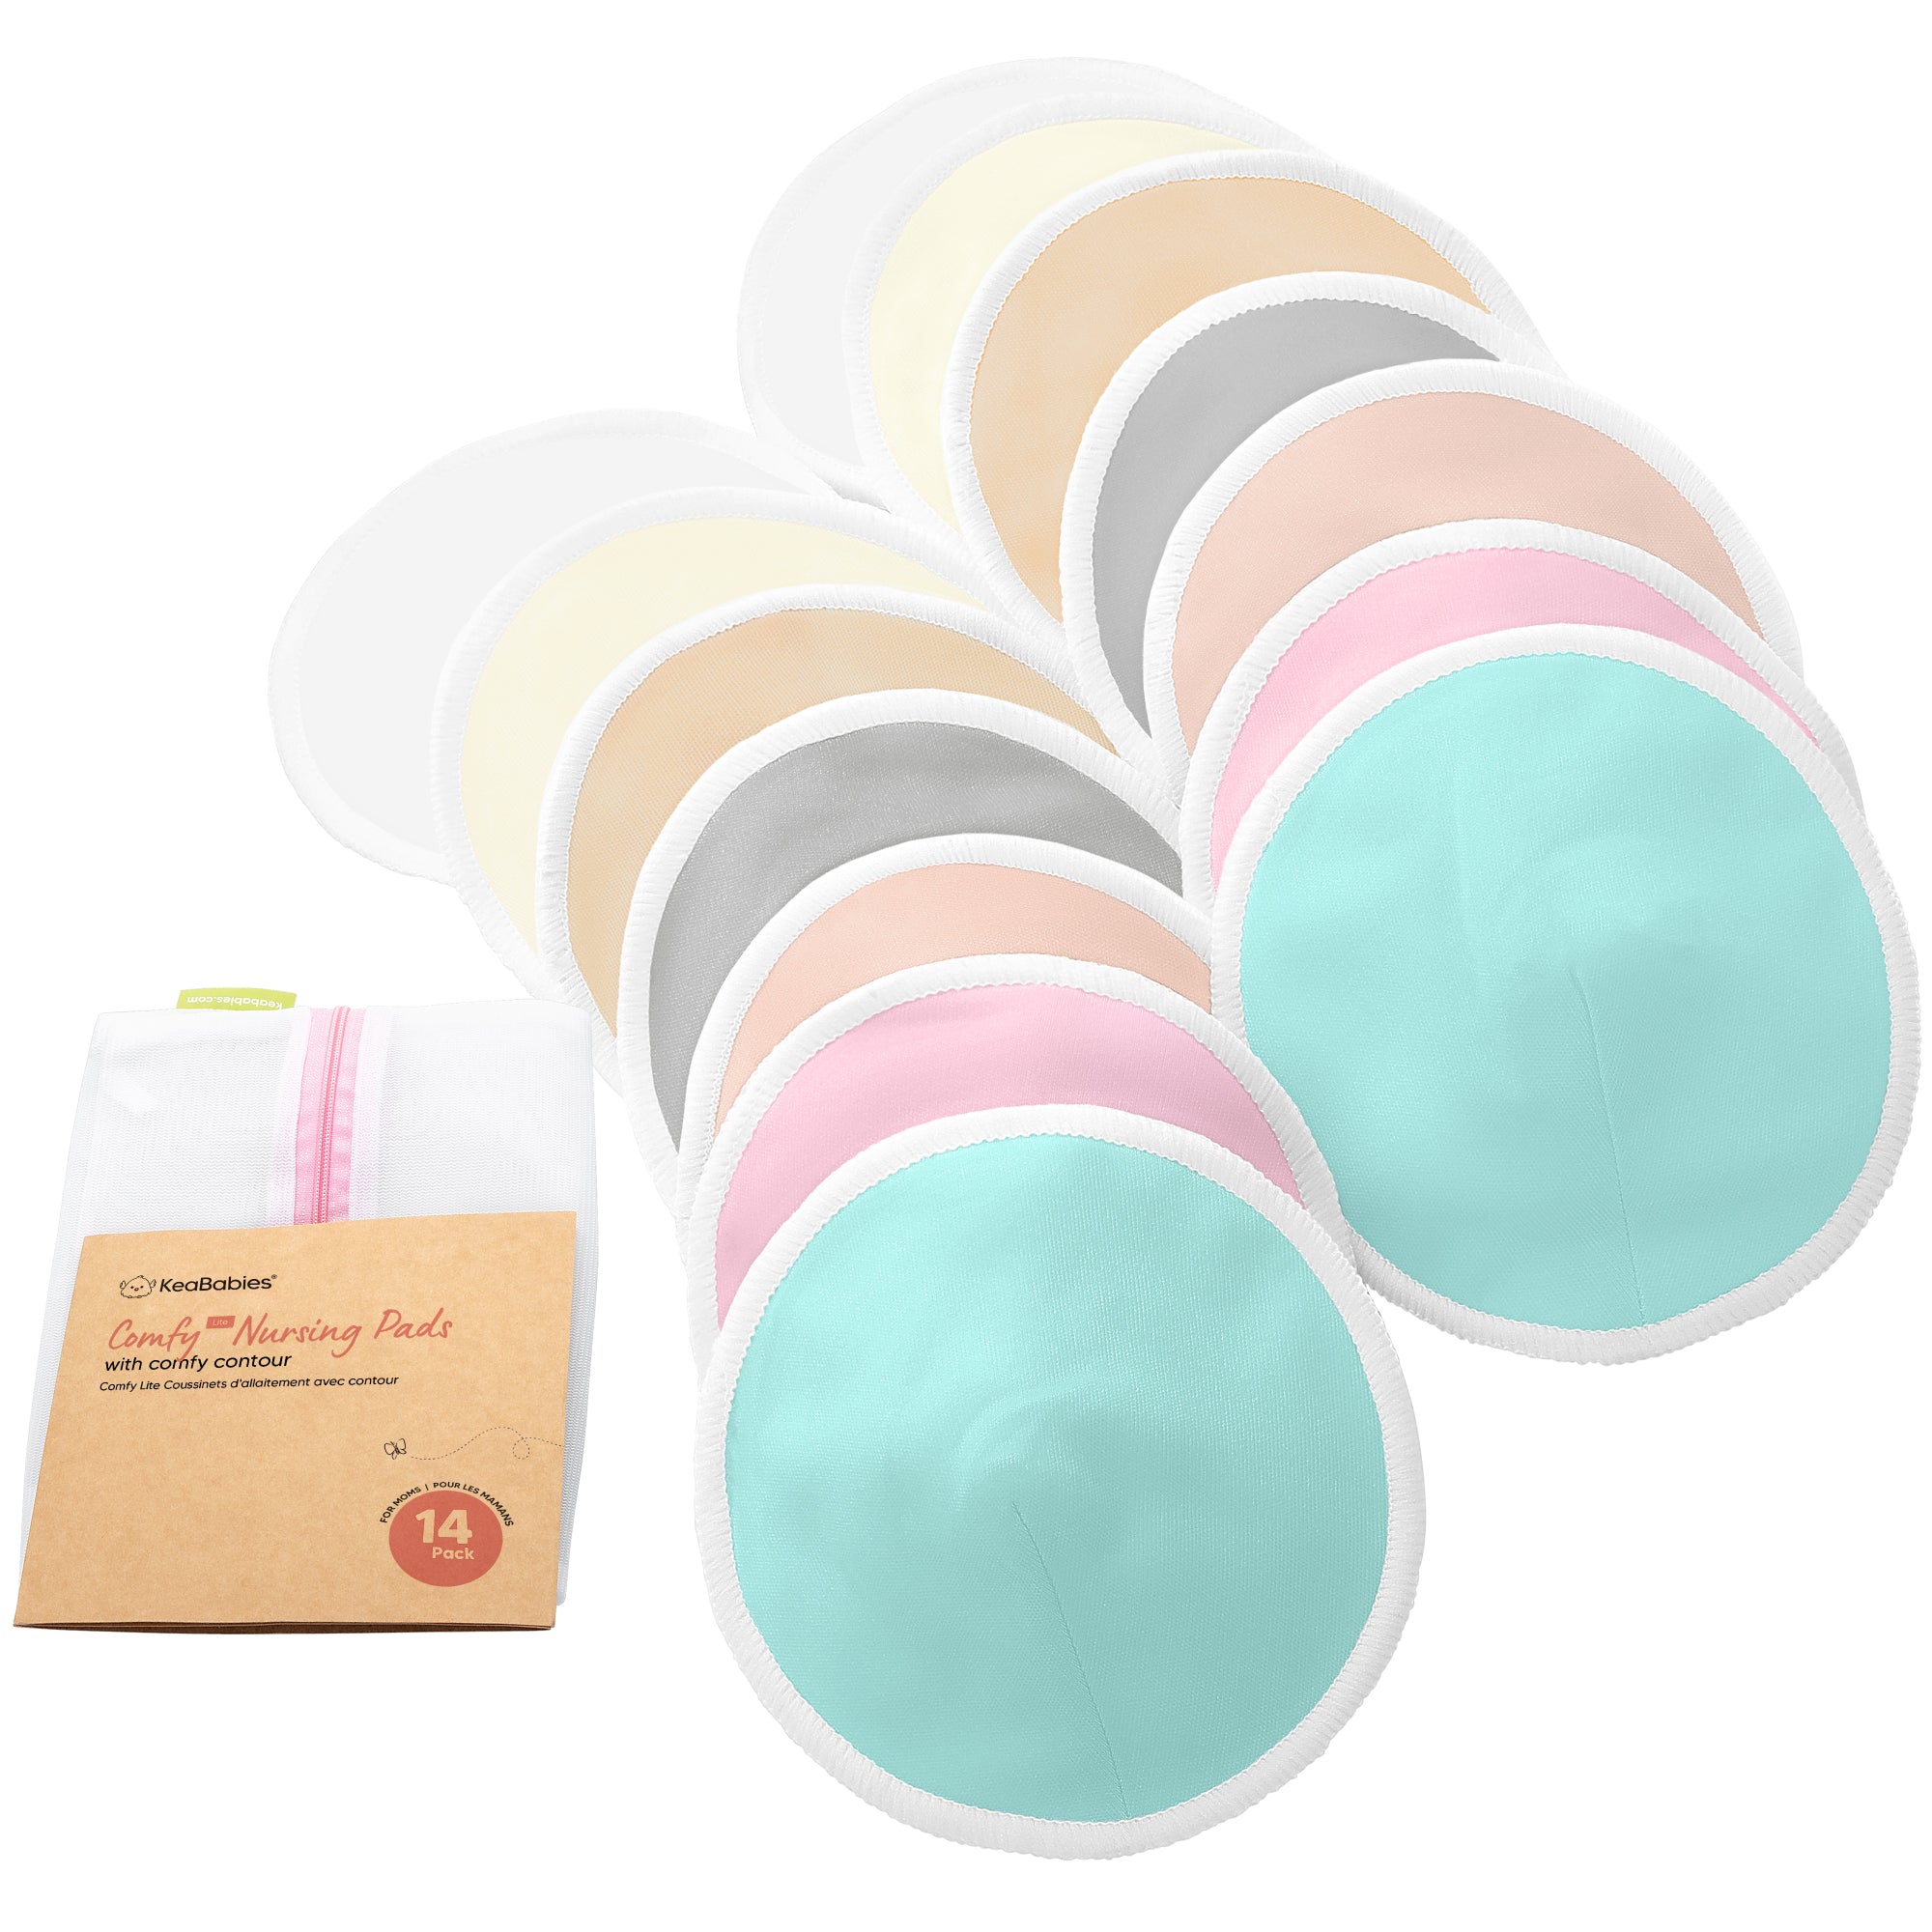 KeaBabies 14pk Soothe Reusable Nursing Pads for Breastfeeding, 4-Layers  Organic Breast Pads, Washable Nipple Pads (Lovelle, Large 4.8)